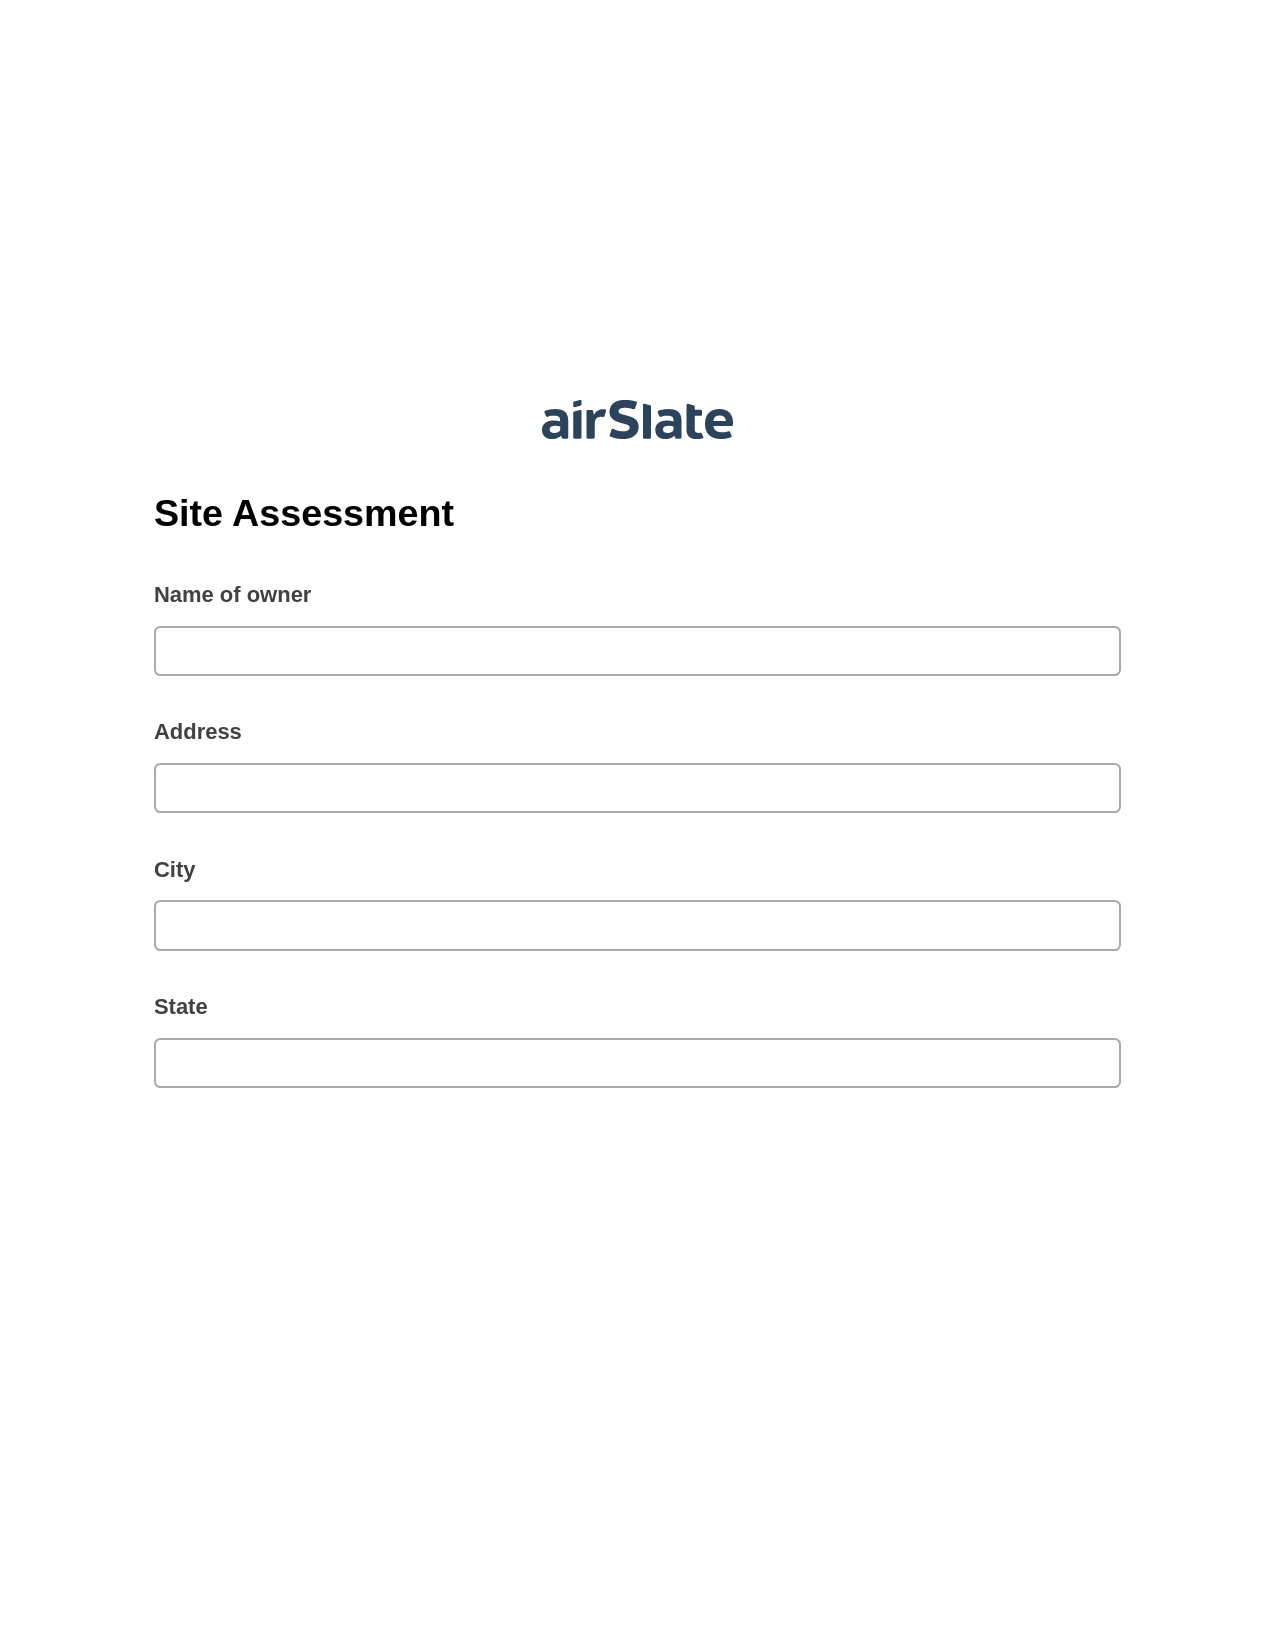 Site Assessment Pre-fill from NetSuite Records Bot, Roles Reminder Bot, Export to Excel 365 Bot